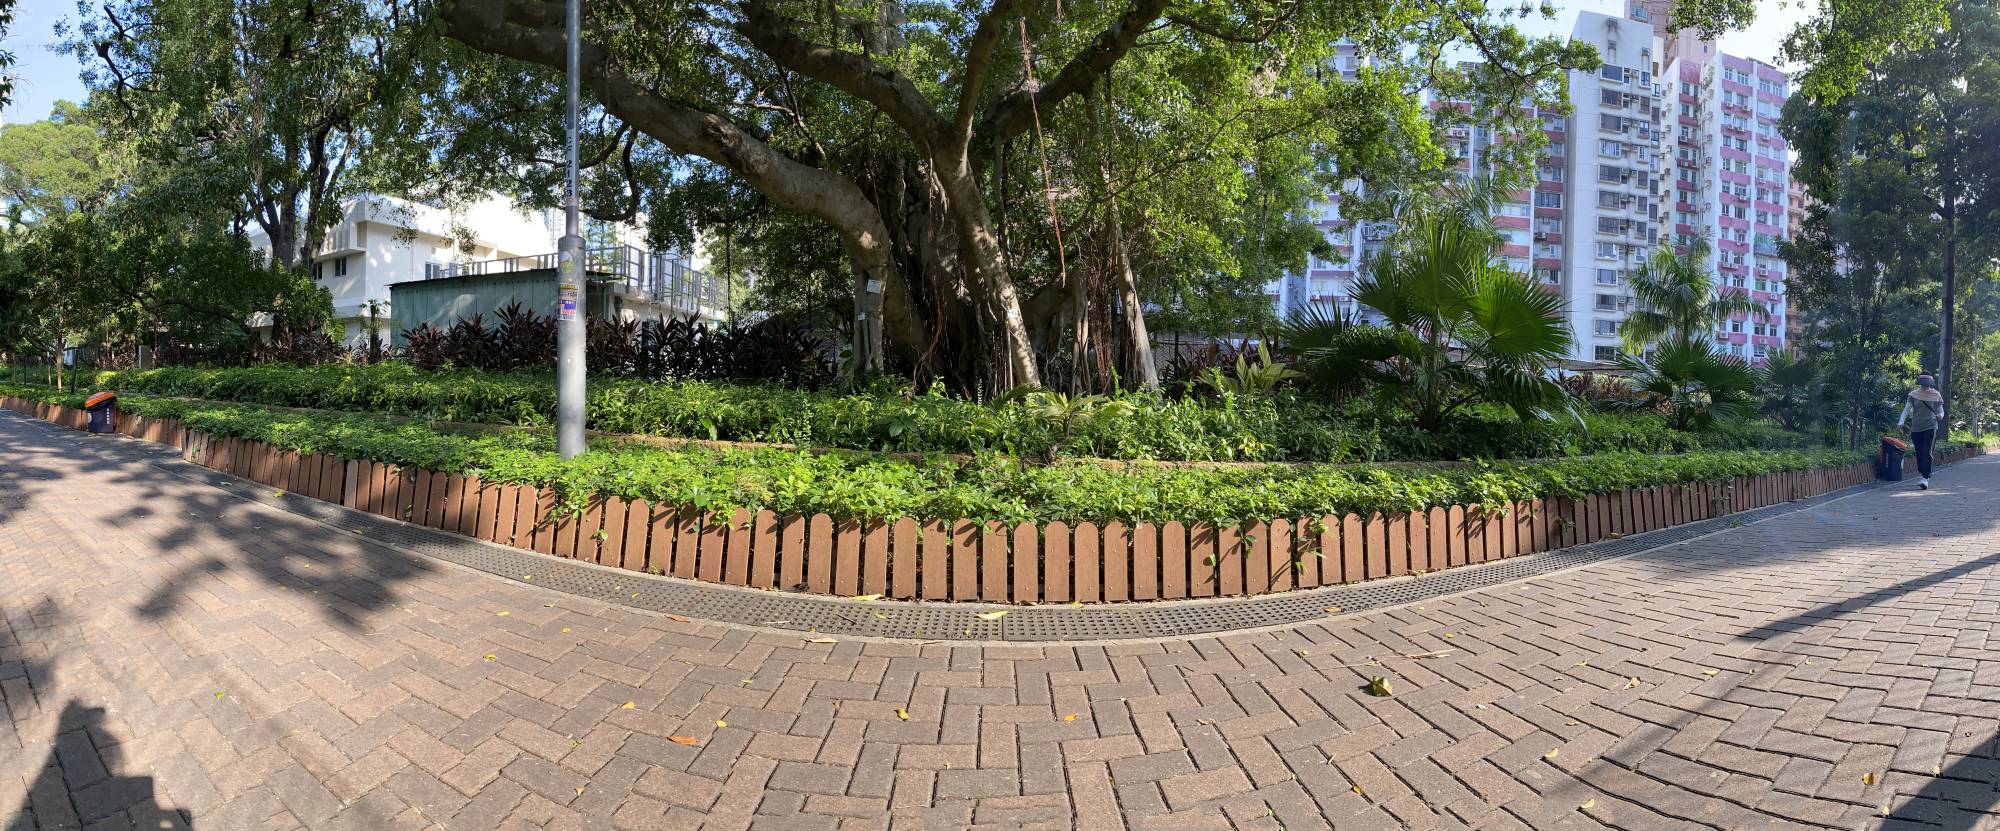 The Yau Mong District Study proposes that the existing covered nullah at Flower Street Path be reopened and converted into a waterway which will be extended across Prince Edward Road West to Nathan Road.